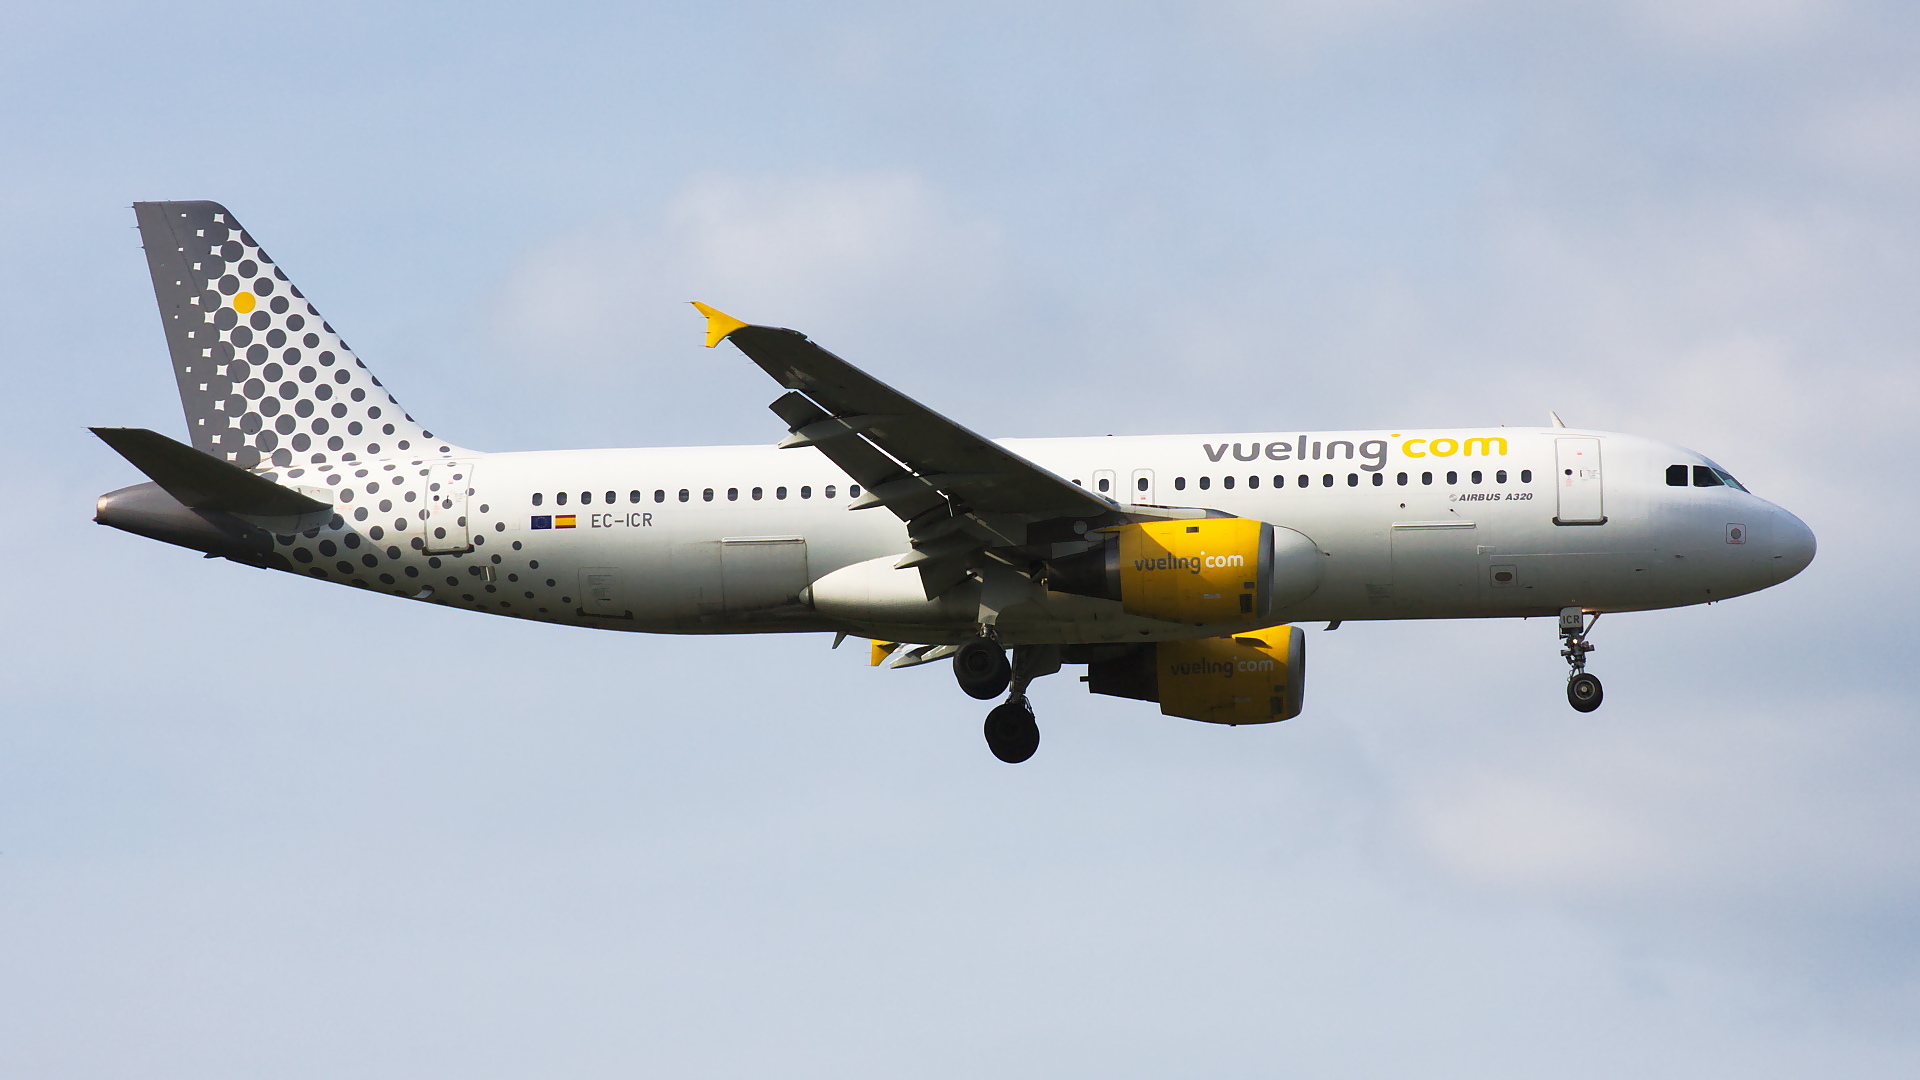 EC-ICR ✈ Vueling Airlines Airbus A320-211 @ London-Heathrow